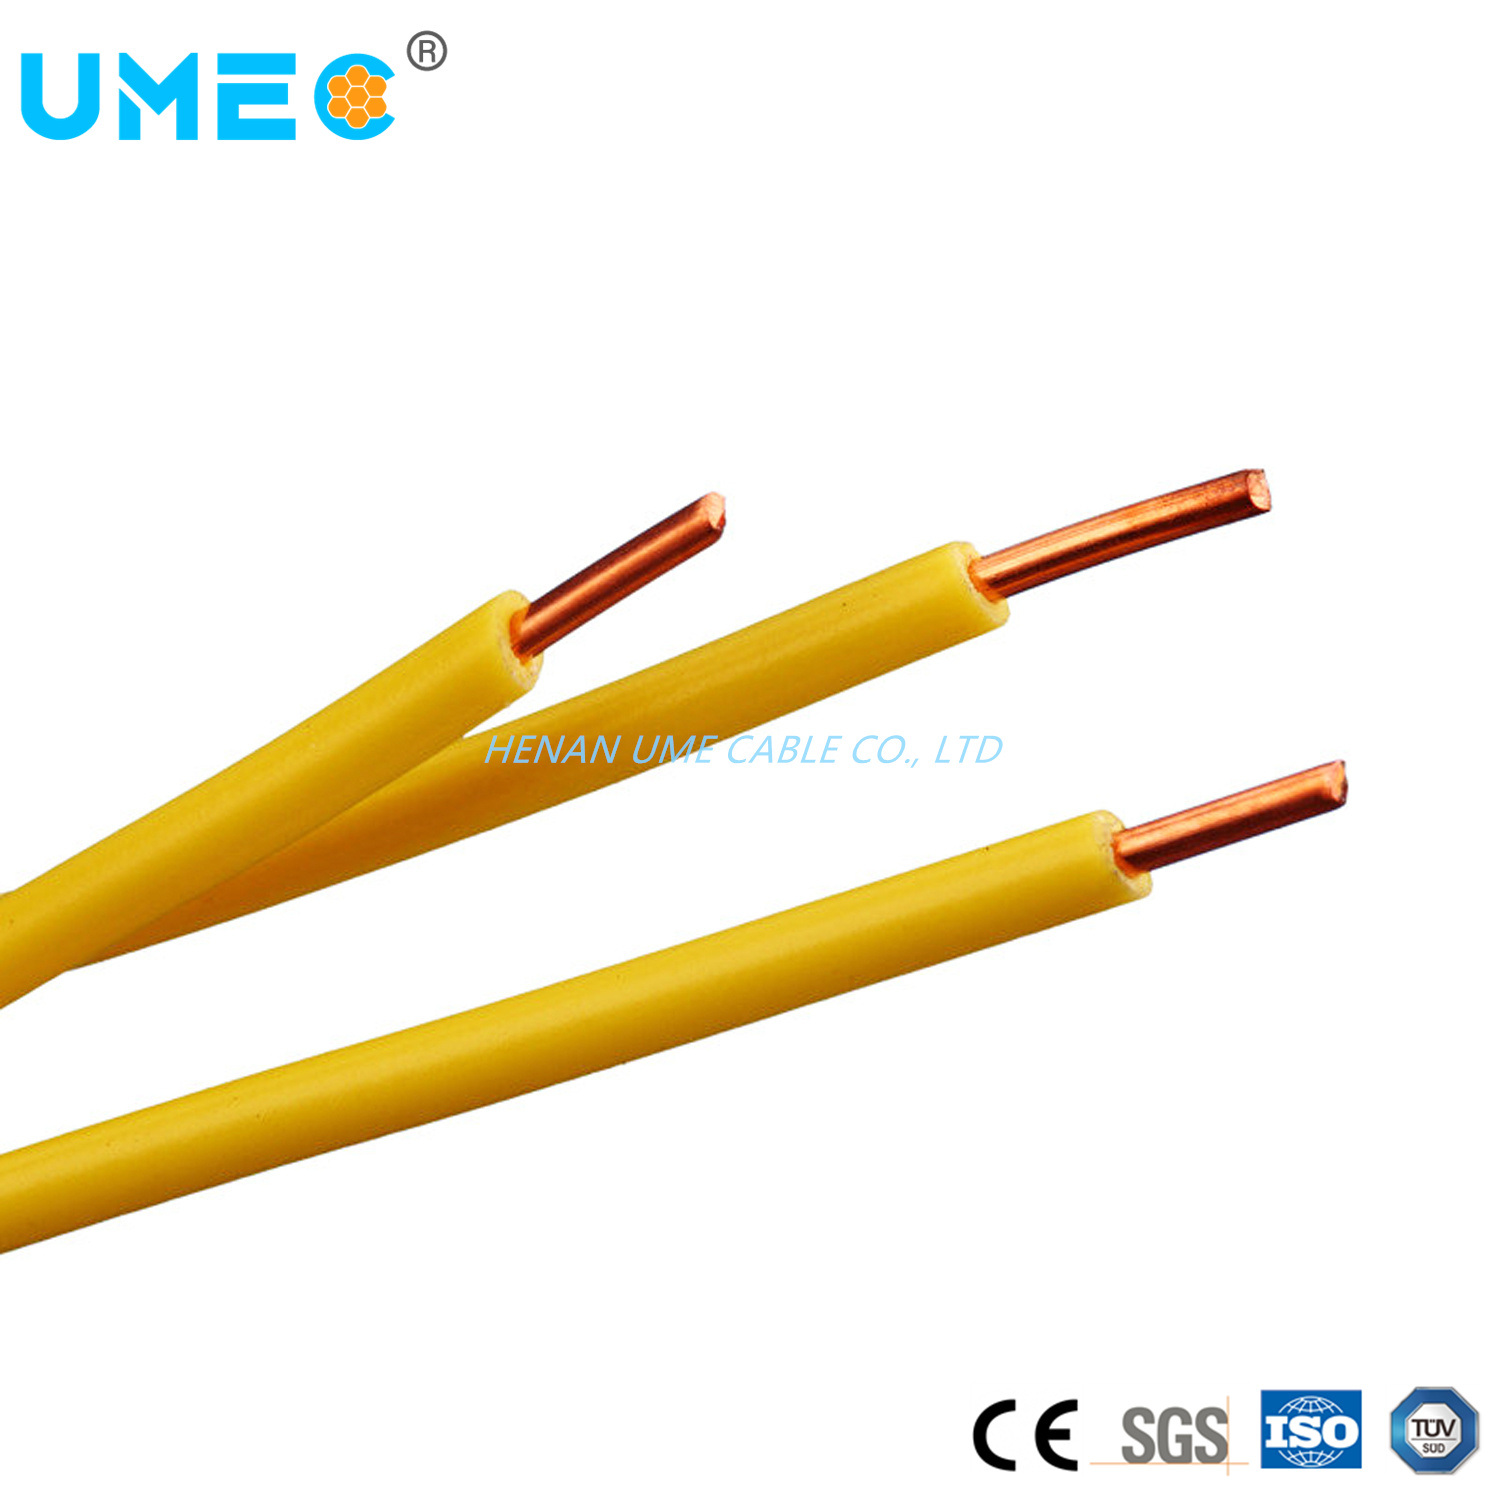 Electrical BV/Blv Copper/Aluminum Conductor with PVC Insulated Copper Wire Solid Stranded House Wiring Cable